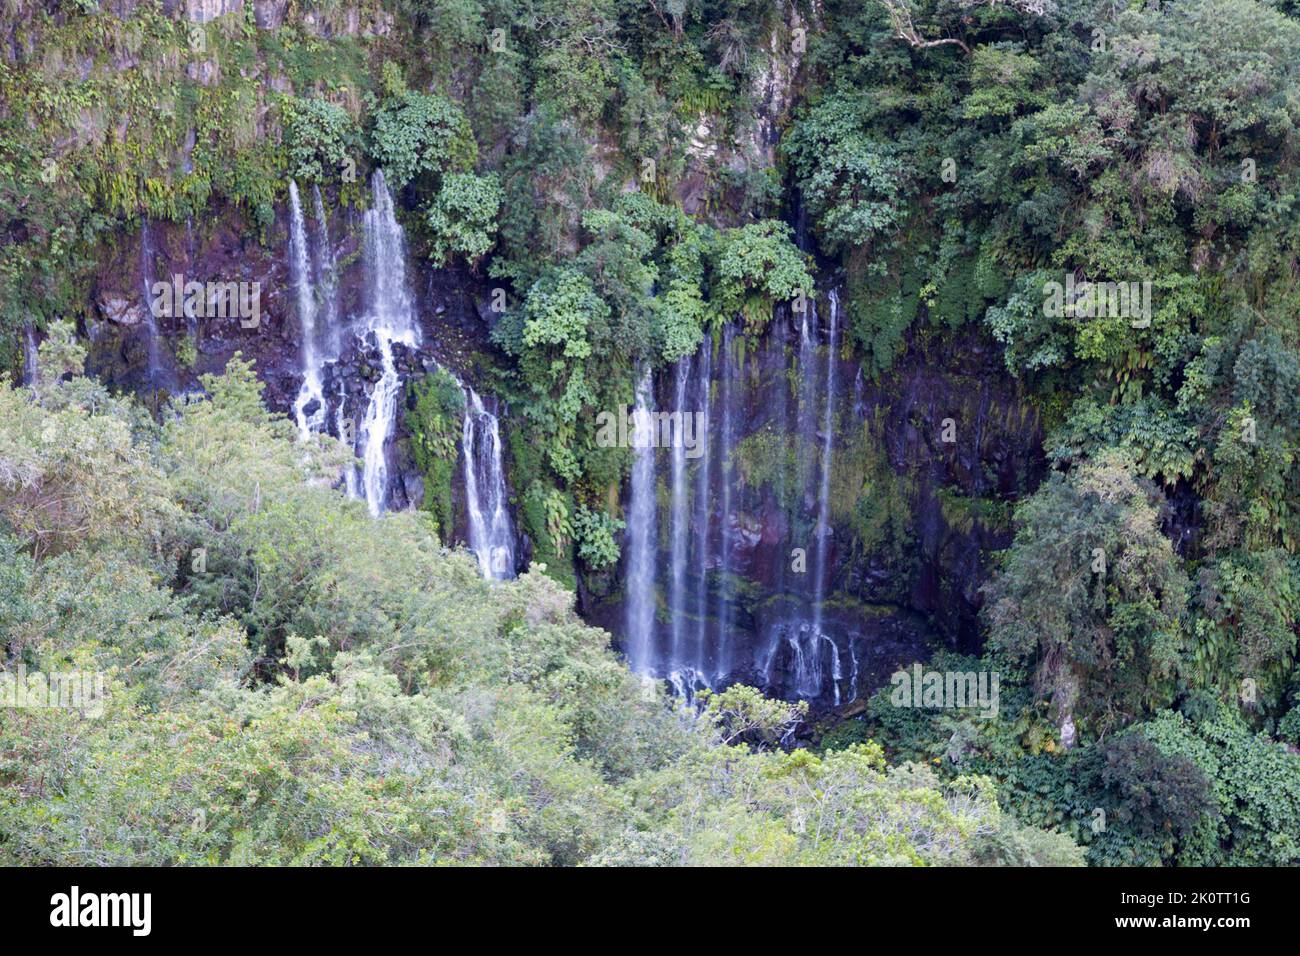 The Grand Galet Falls (also called Langevin Falls after the name of its river) is situated in the commune of Saint-Joseph in Reunion Island Stock Photo